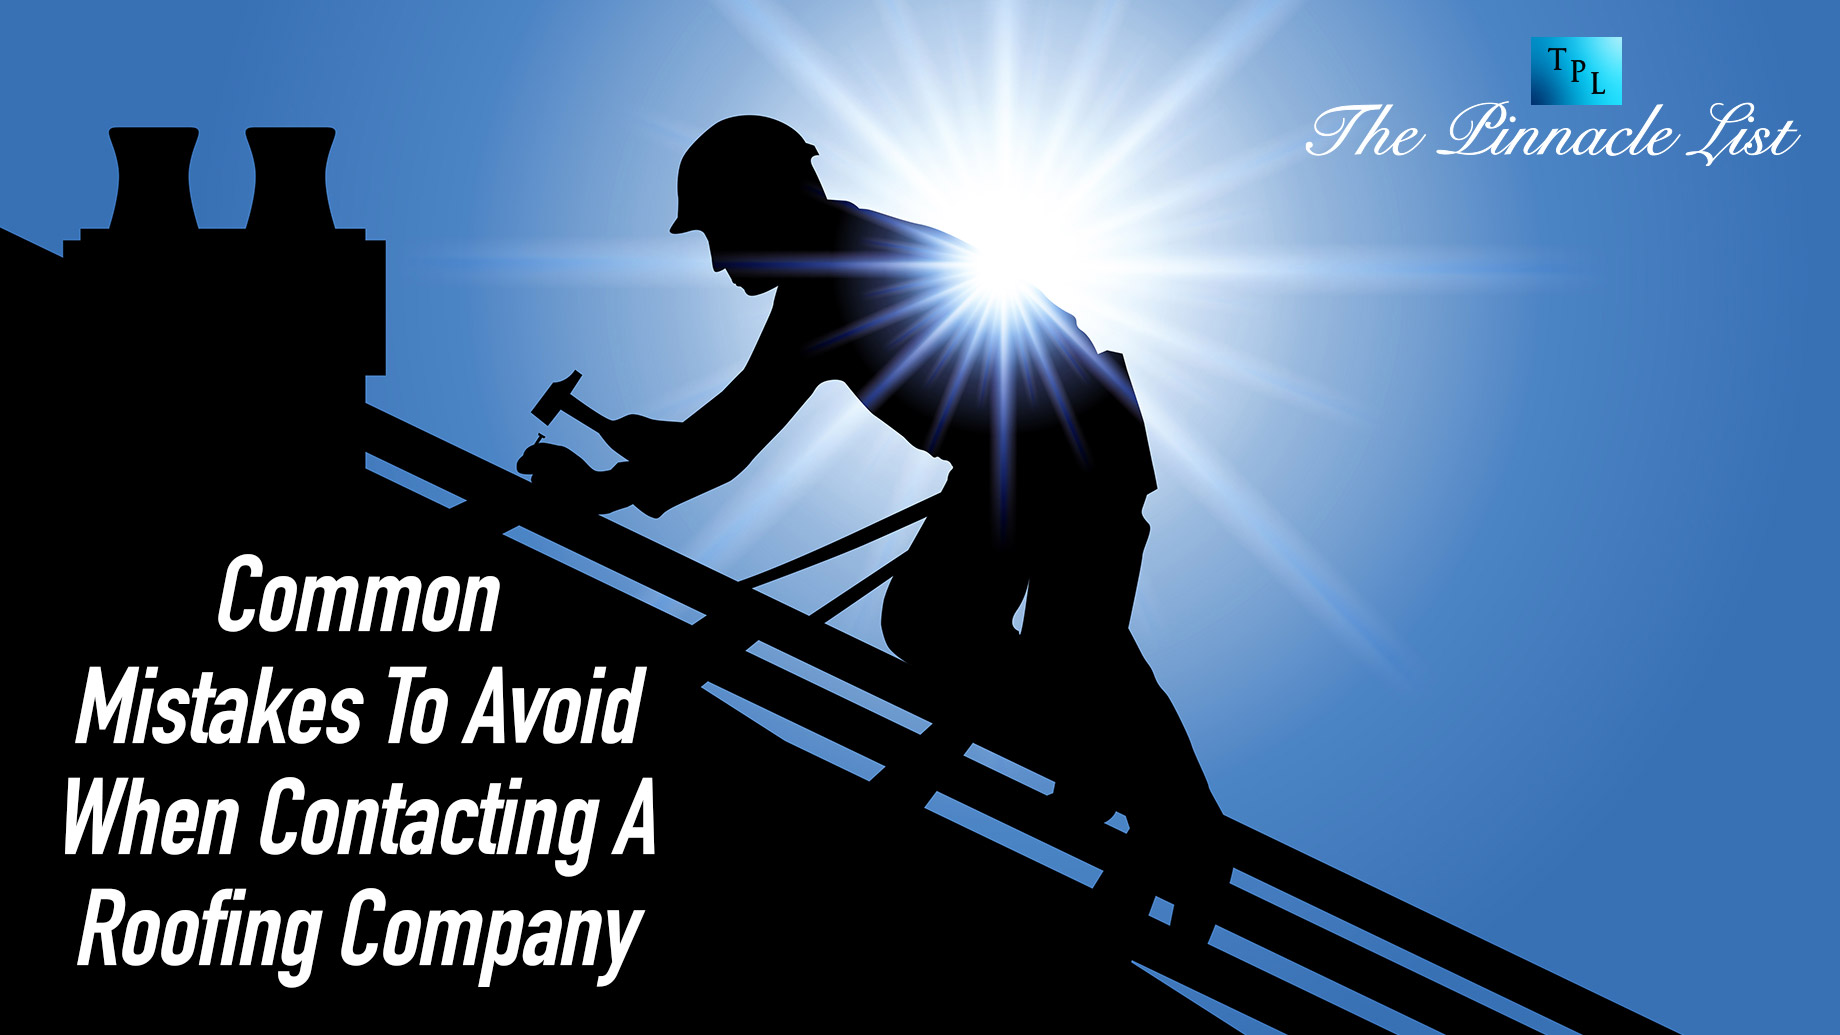 Common Mistakes To Avoid When Contacting A Roofing Company